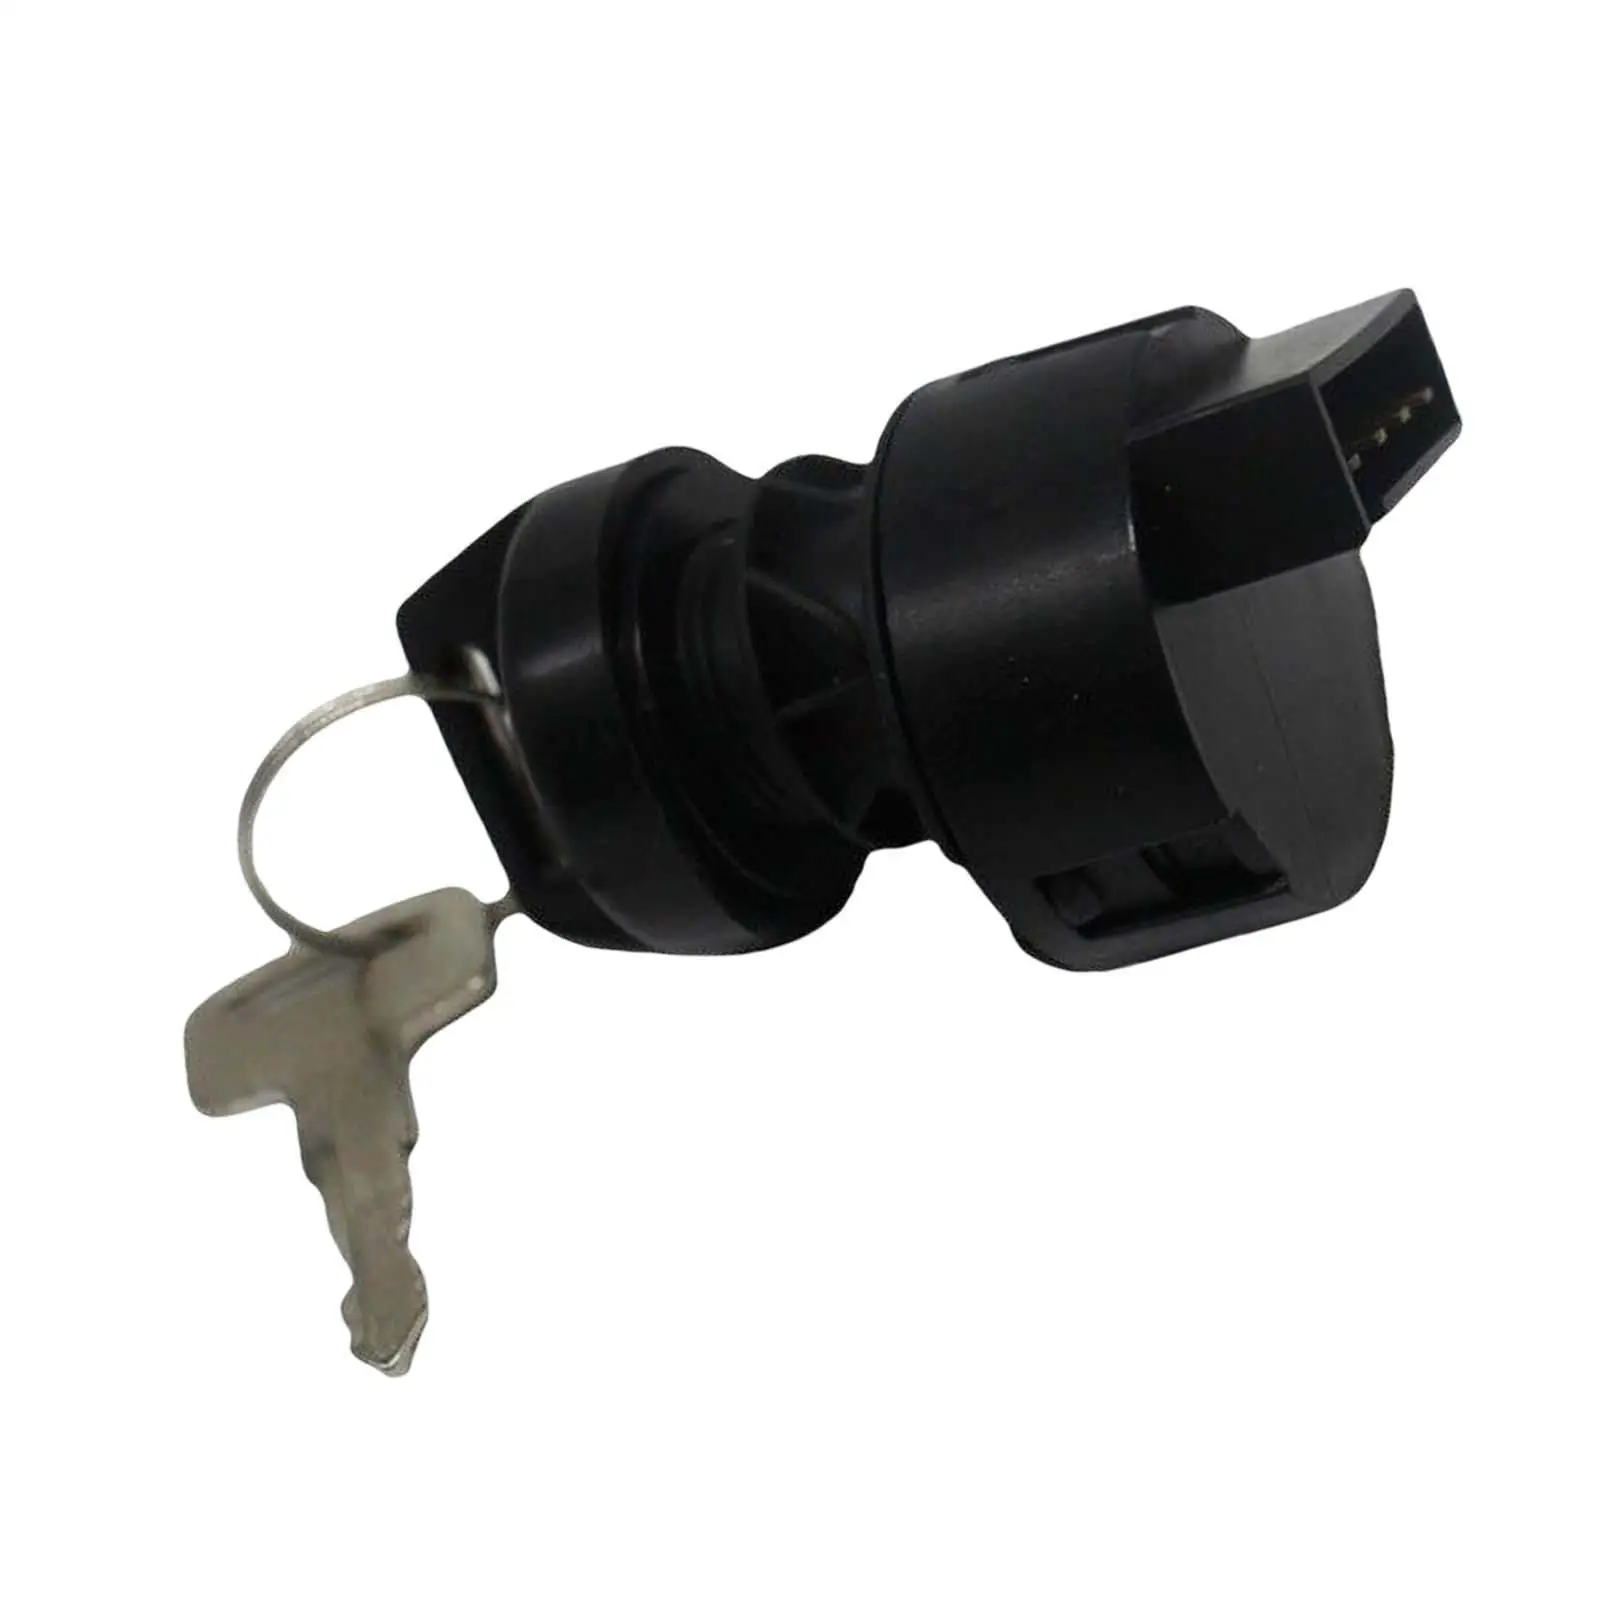 Ignition Switch Lock Premium with 2 Keys Accessory Replaces Practical Easy to Install for Polaris Sportsman 335 400 500 600